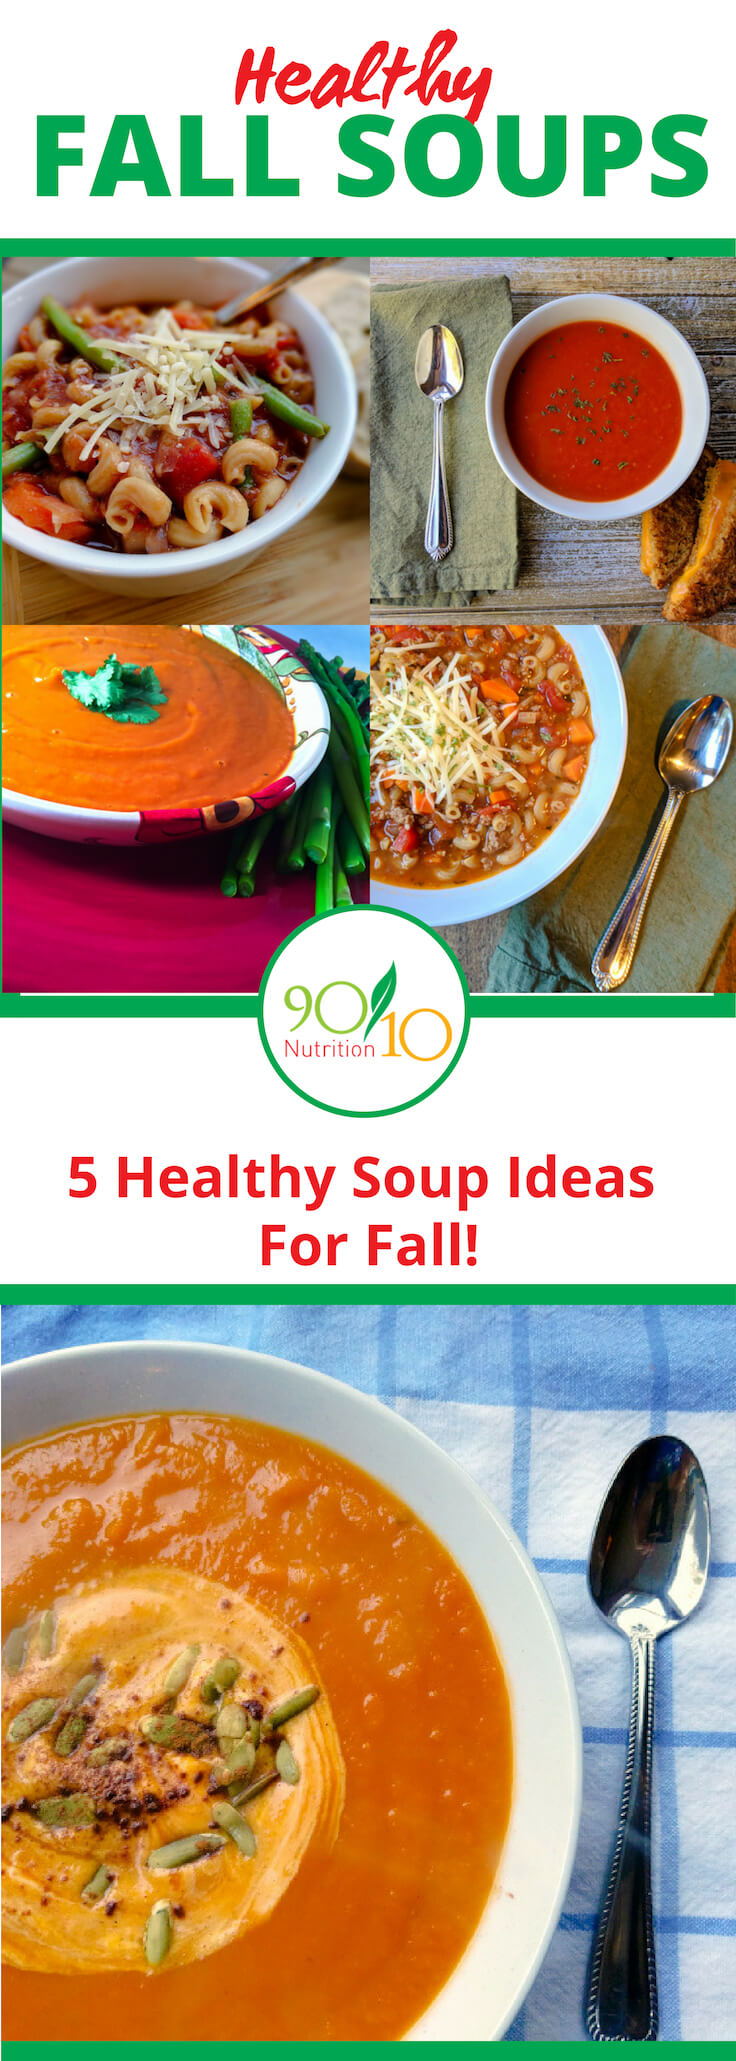 5 healthy soup ideas for fall